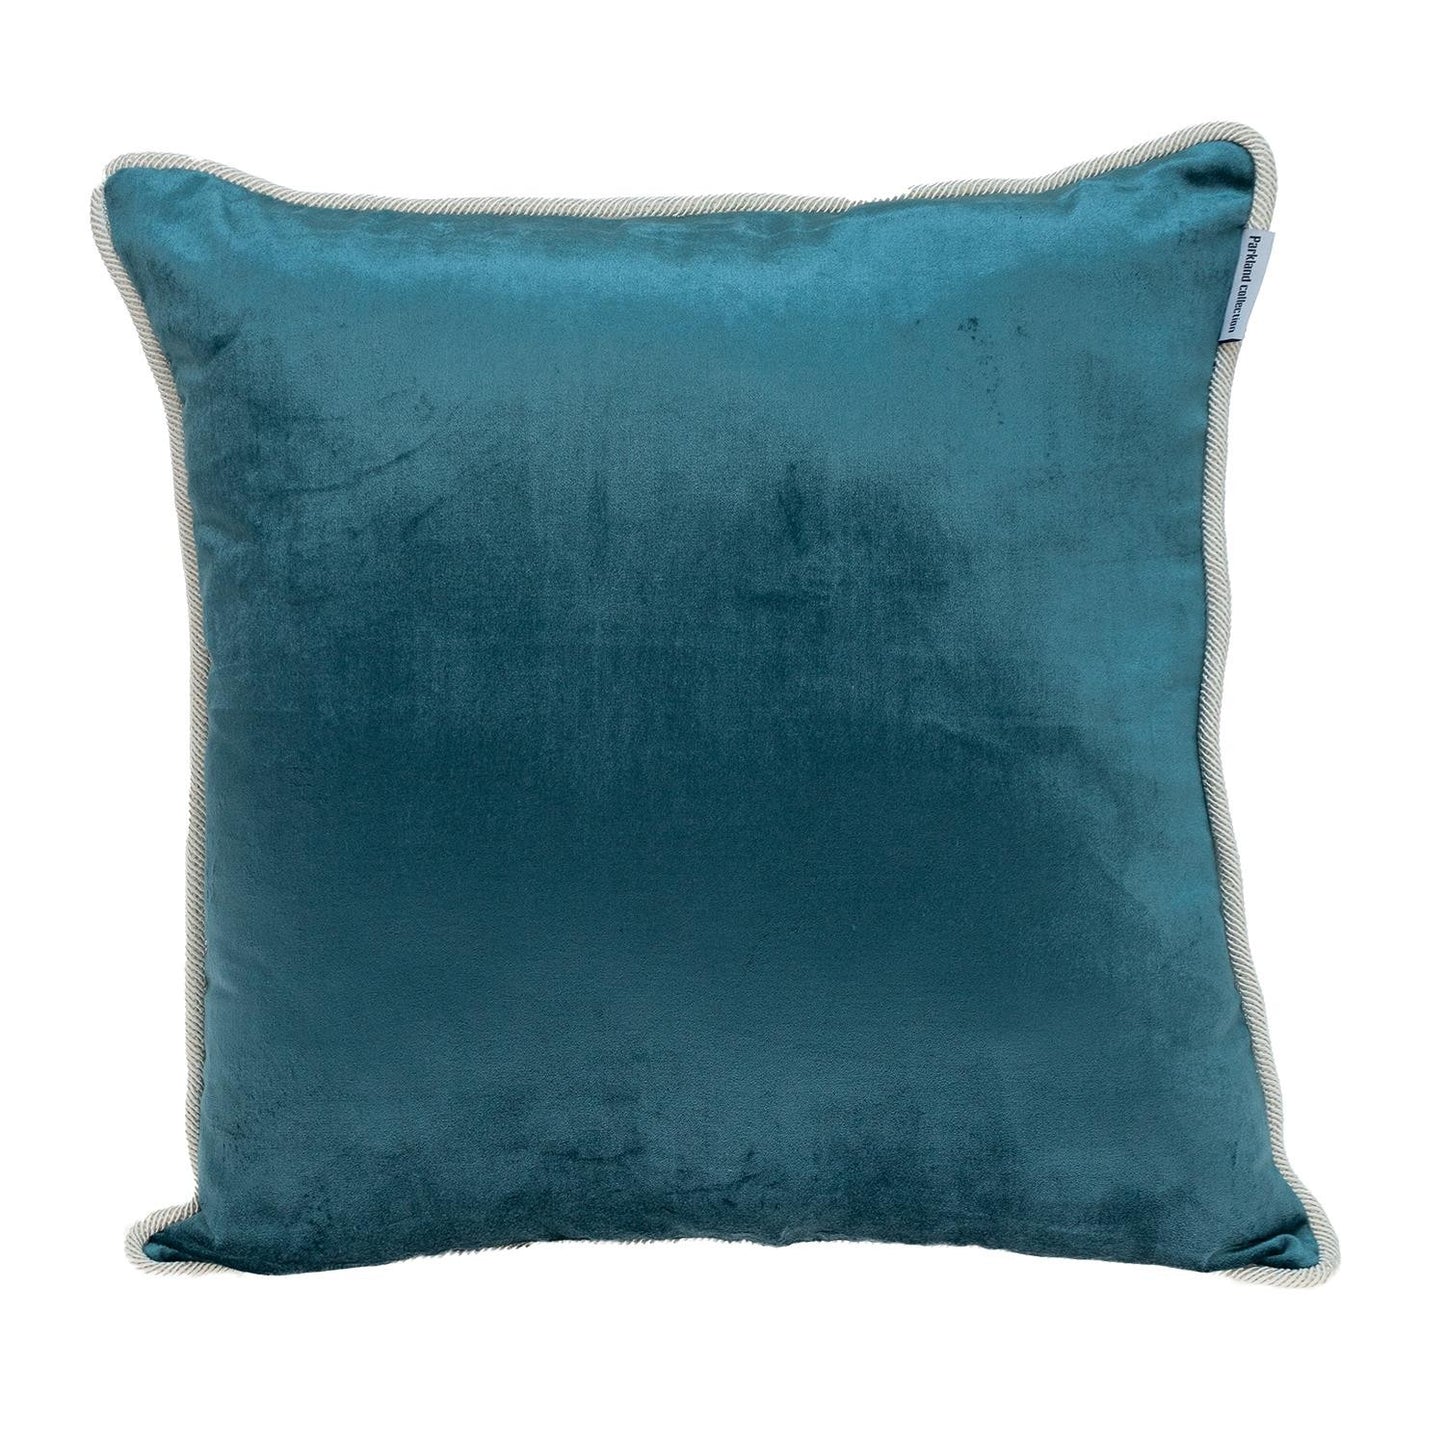 Reversible Gray and Teal Square Velvet Throw Pillow